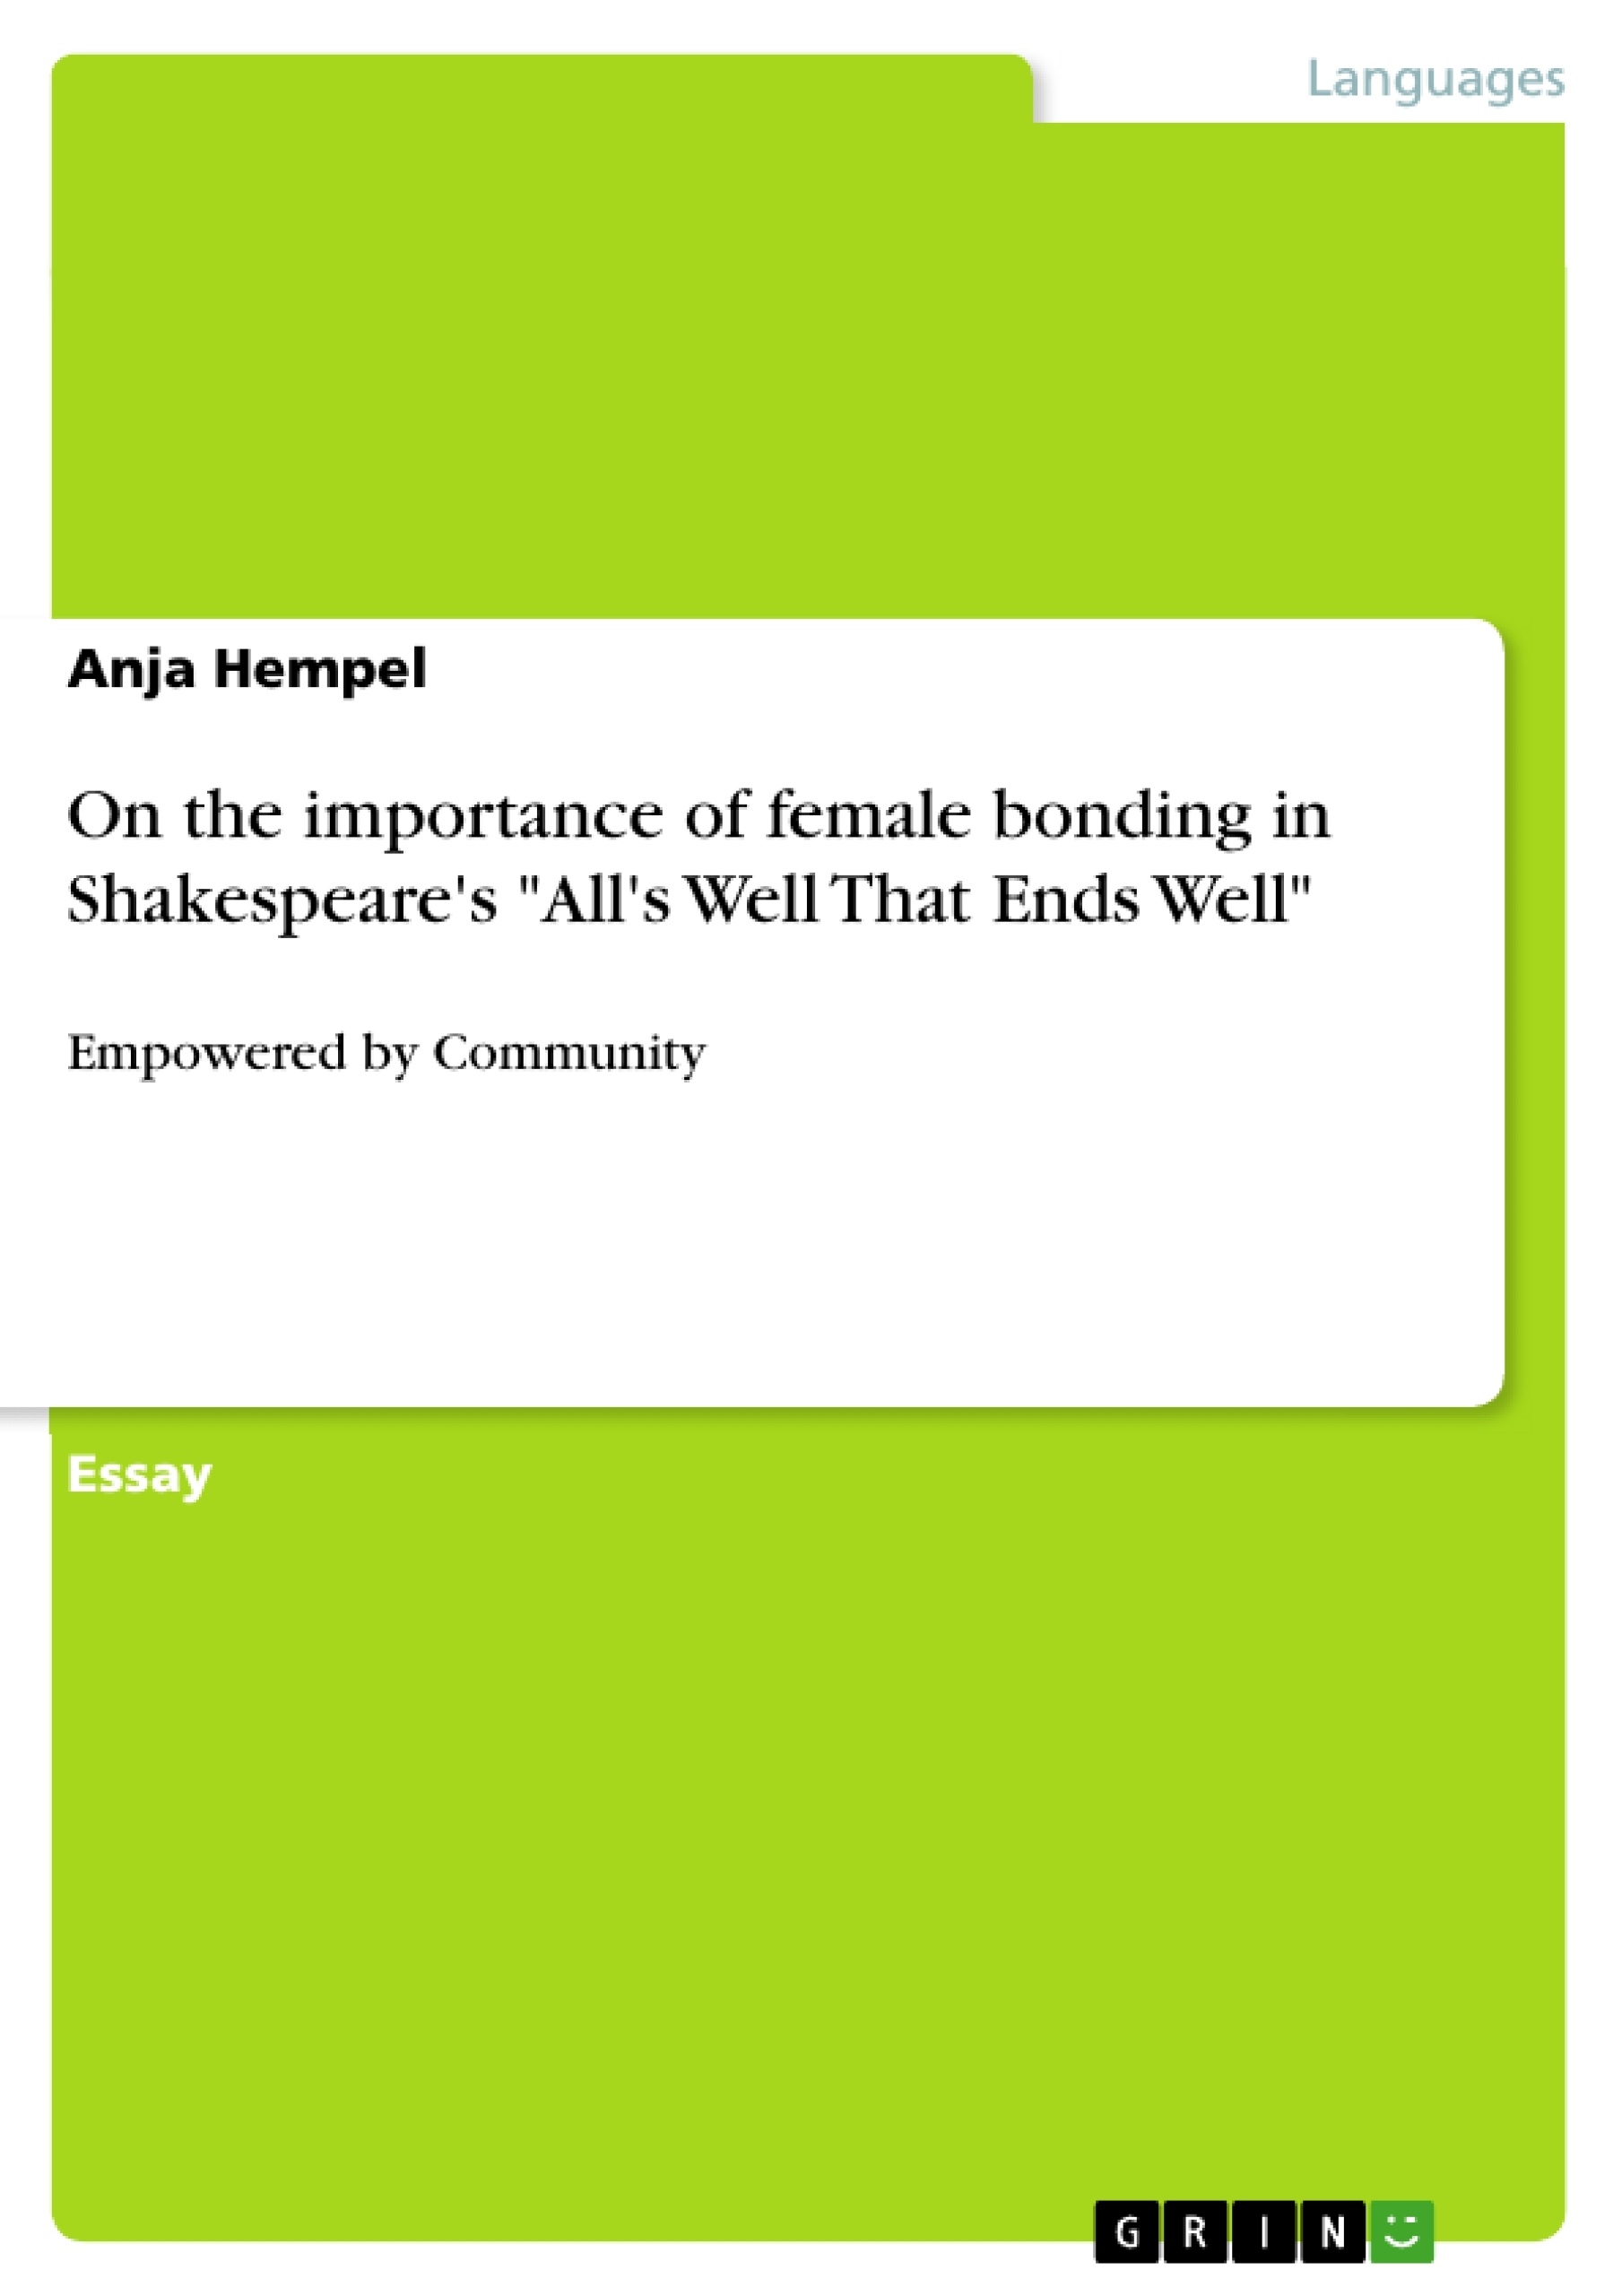 Titel: On the importance of female bonding in Shakespeare's "All's Well That Ends Well"